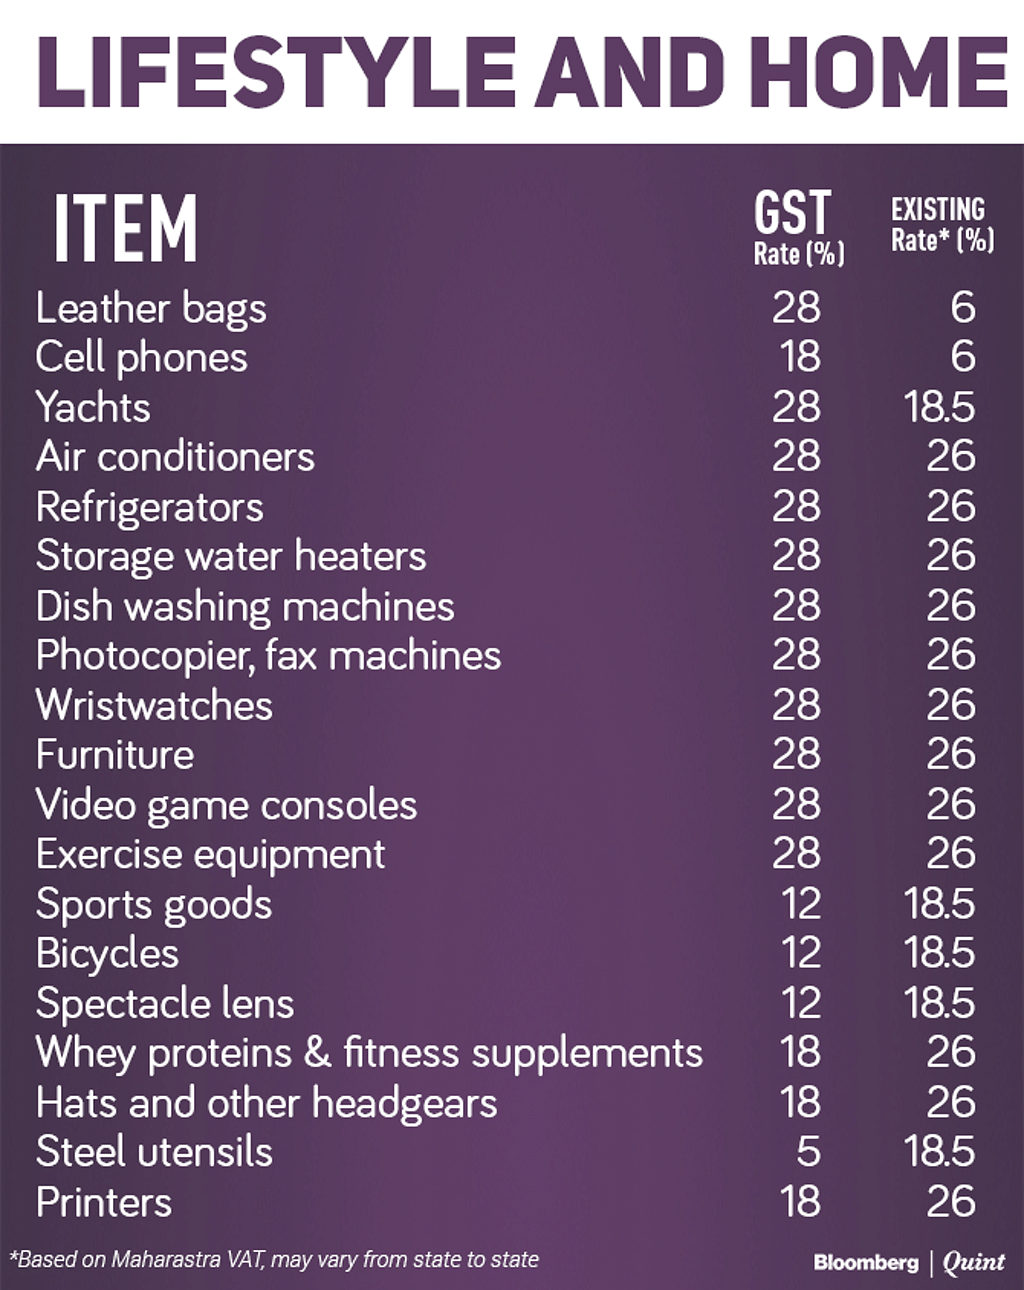 This comprehensive list of rates of products and services before and after GST will help you plan your budget.